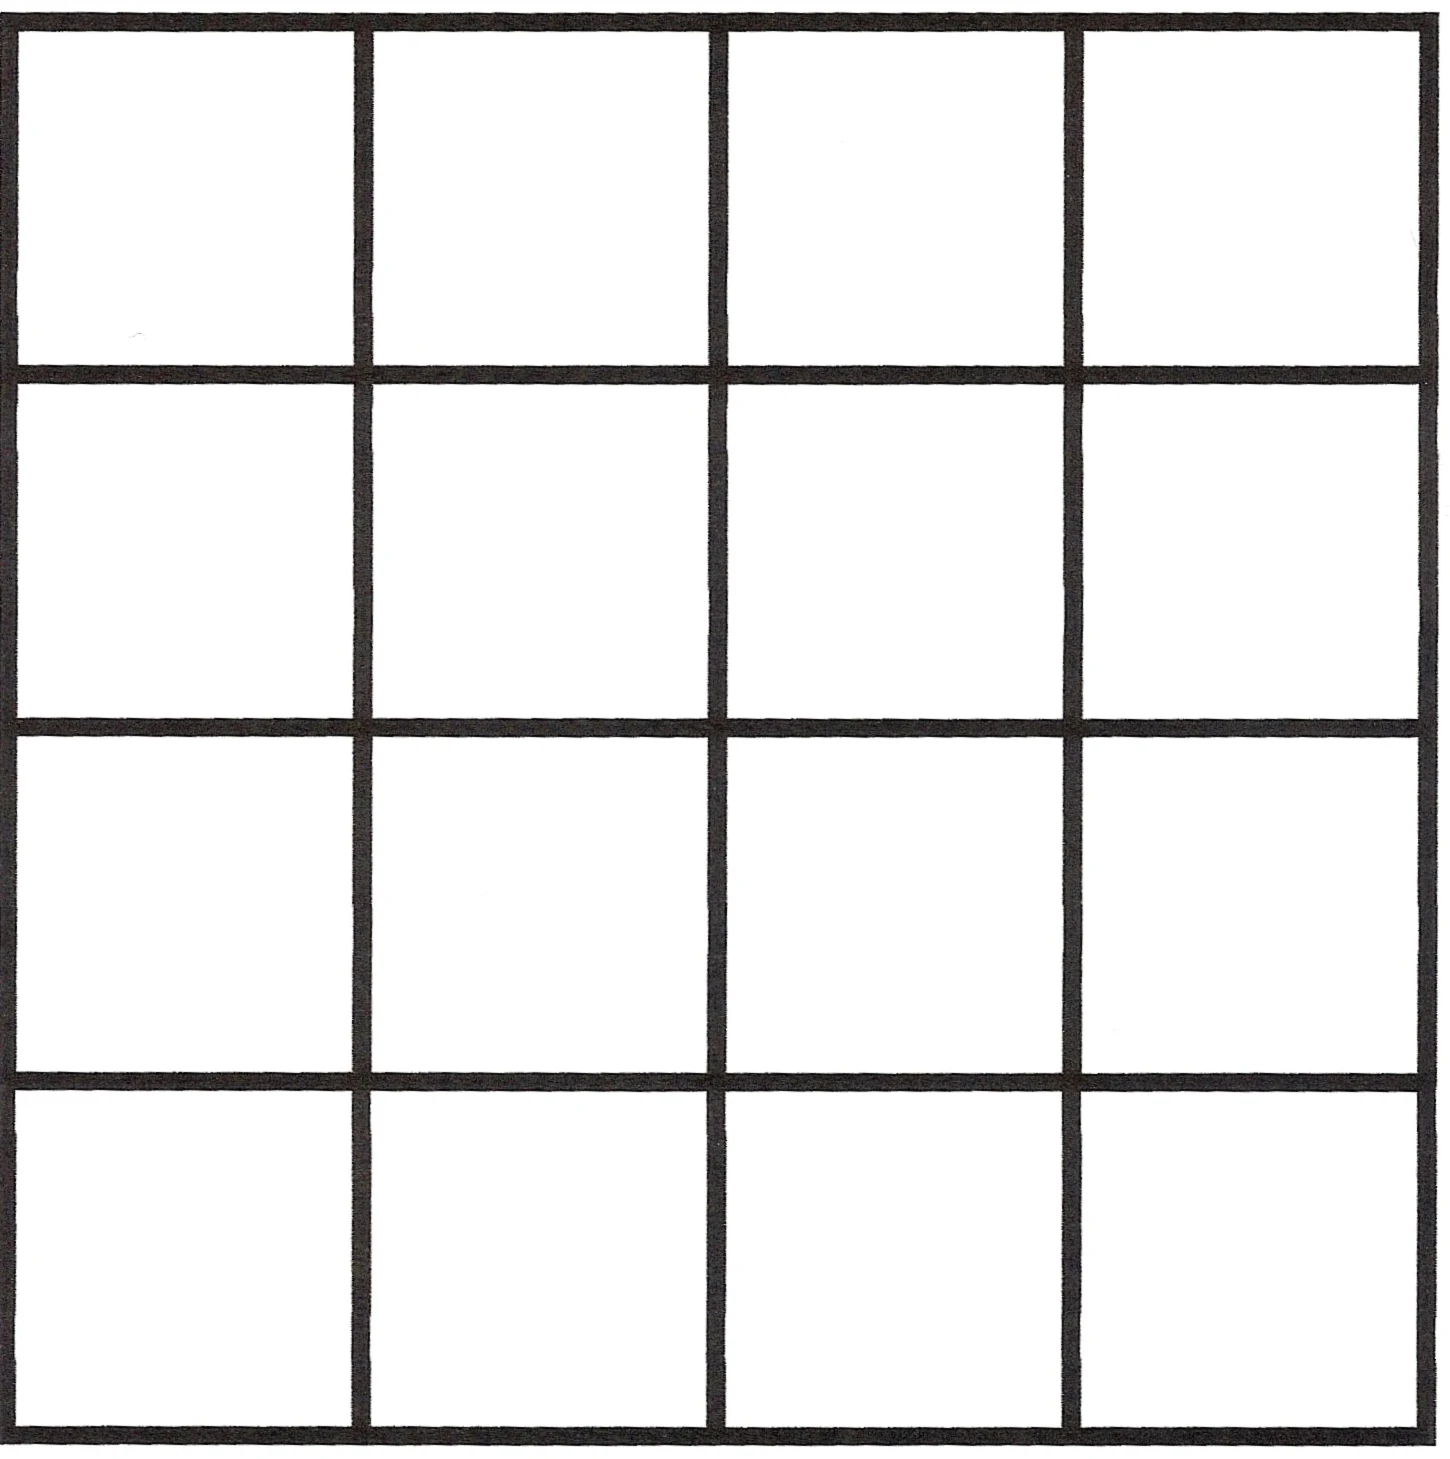 Search Results for “Square Grid Printable” Calendar 2015